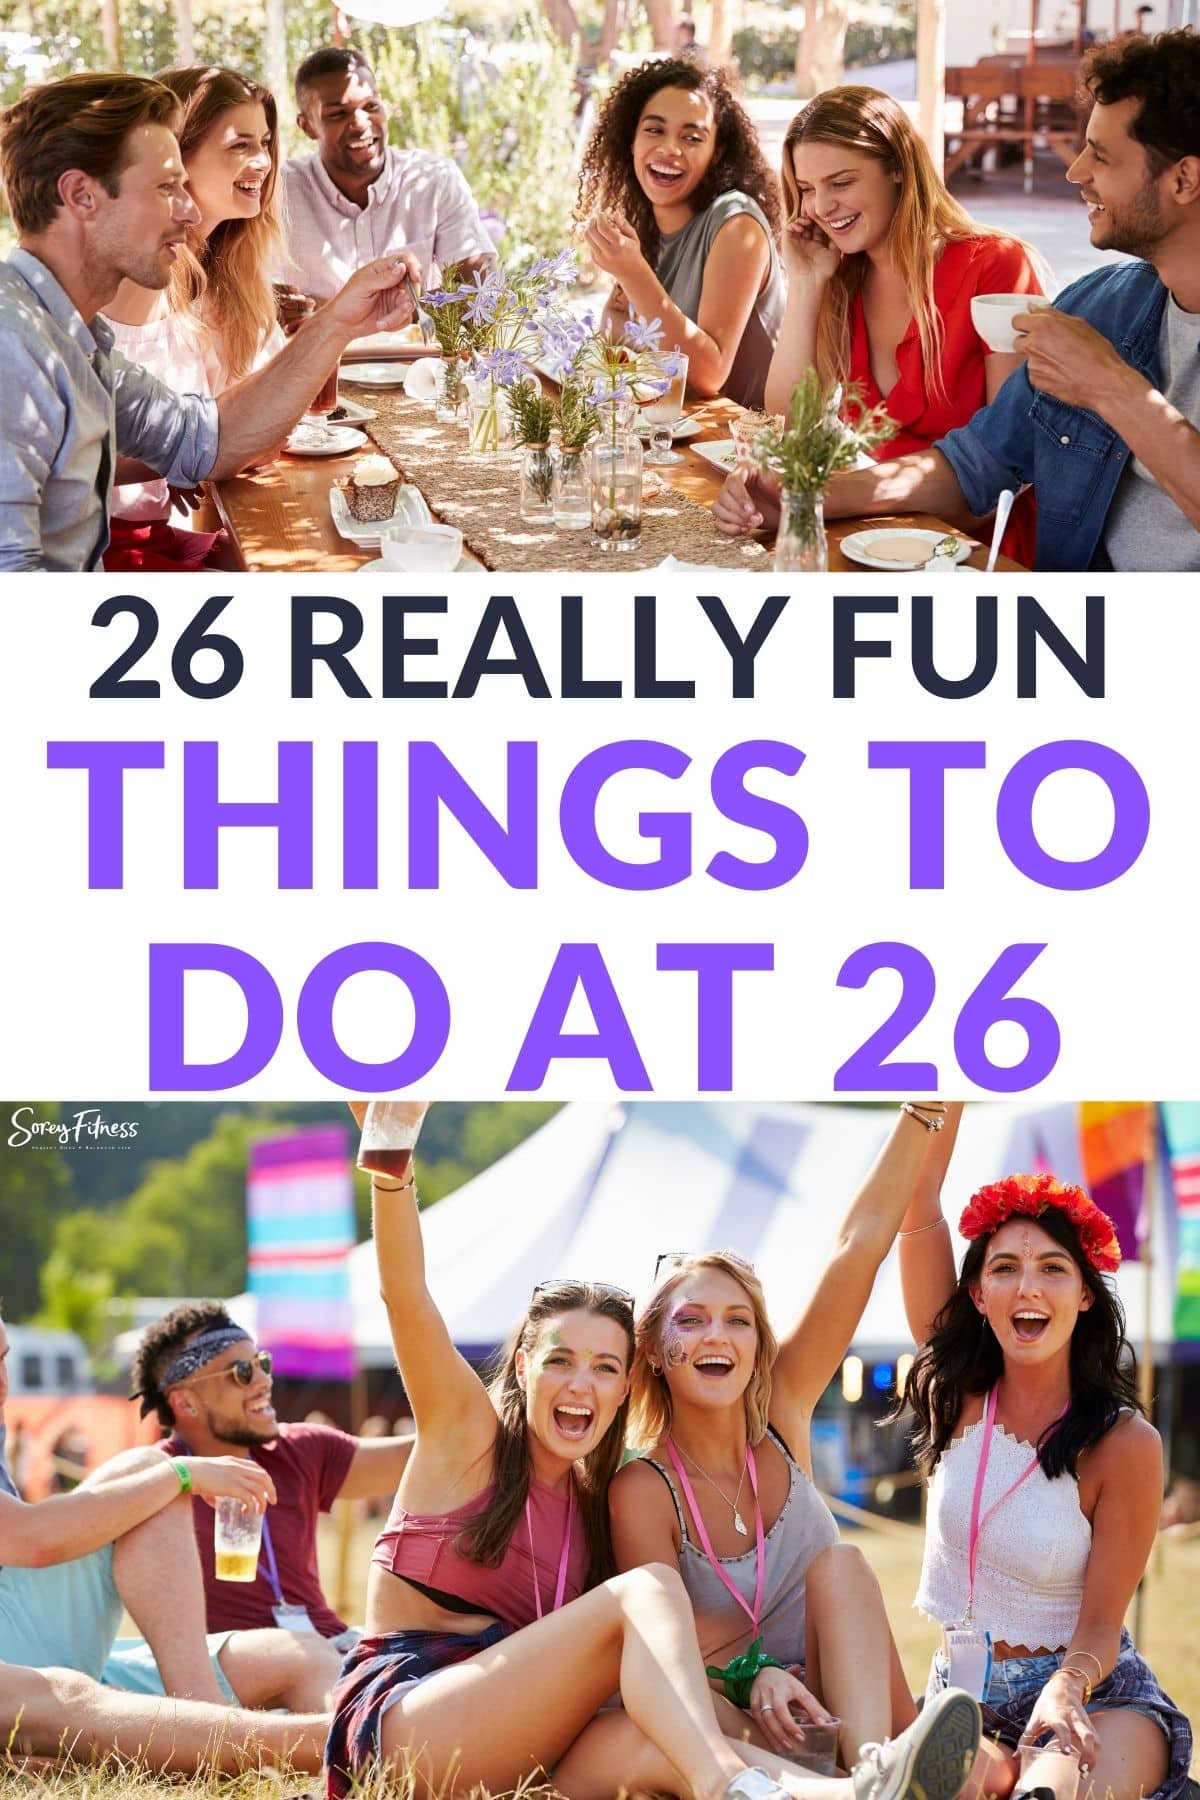 collage of 2 photos of friends in their 20s - text overlay in the middle says "26 really fun things to do at 26"